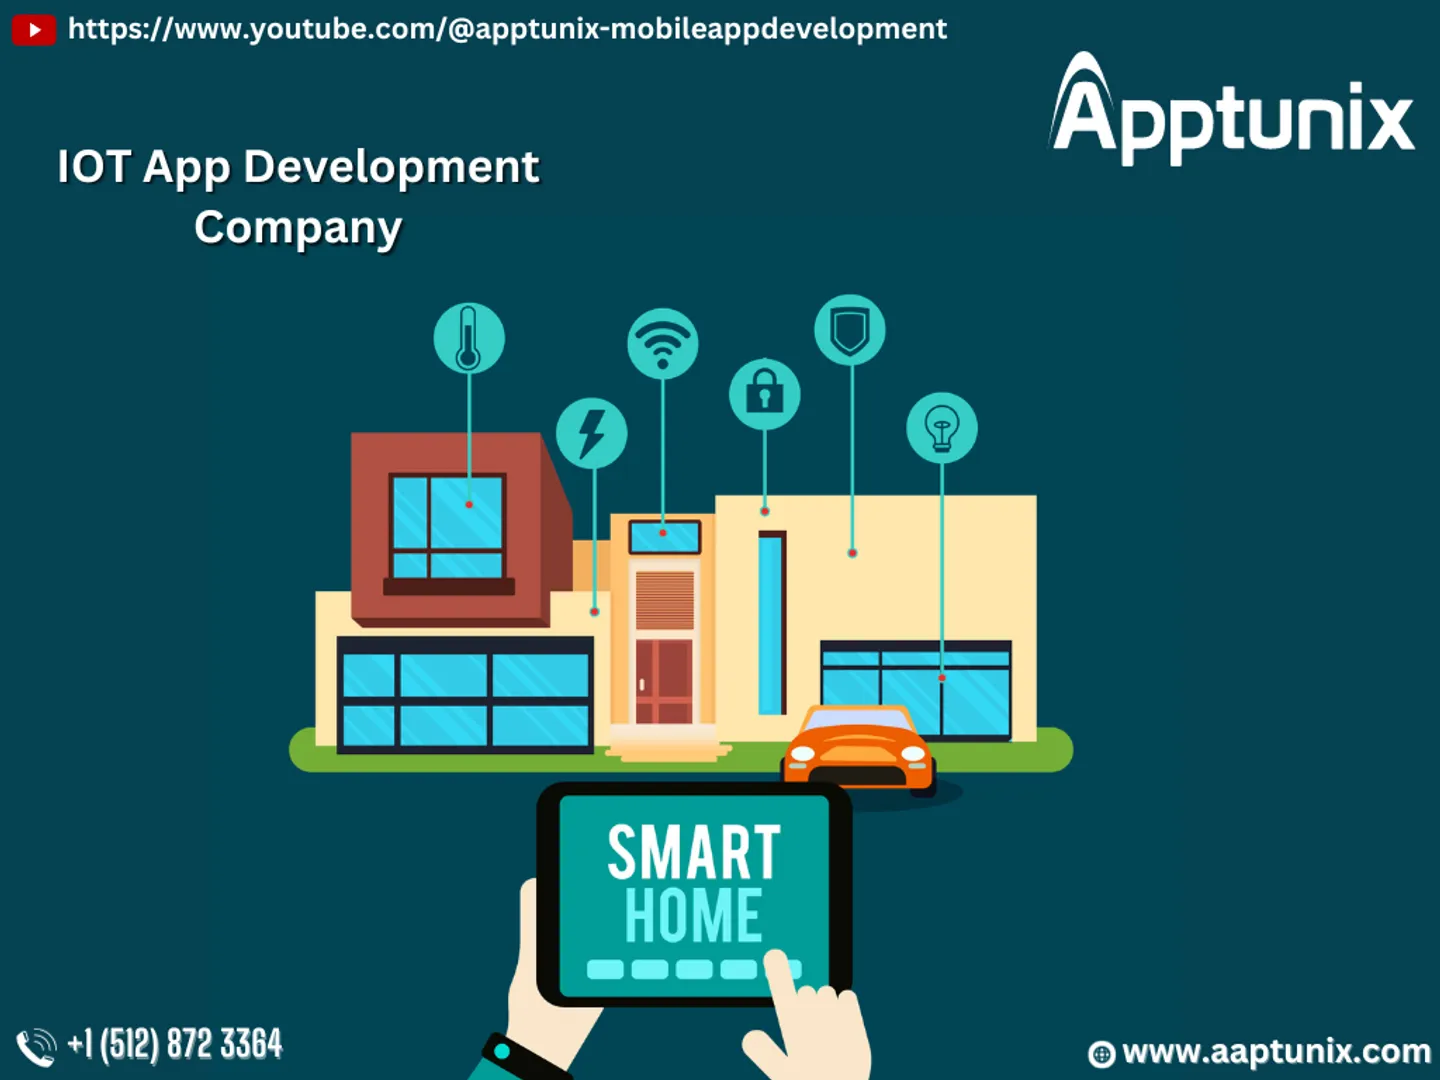 Apptunix is a leading IoT app development company that specializes in creating transformative Internet of Things solutions. With a dedicated team of developers and a deep understanding of IoT technology, we design and build innovative applications that connect devices, data, and industries, unlocking new possibilities and enhancing operational efficiency.

Know more details: https://www.apptunix.com/iot-application-development/